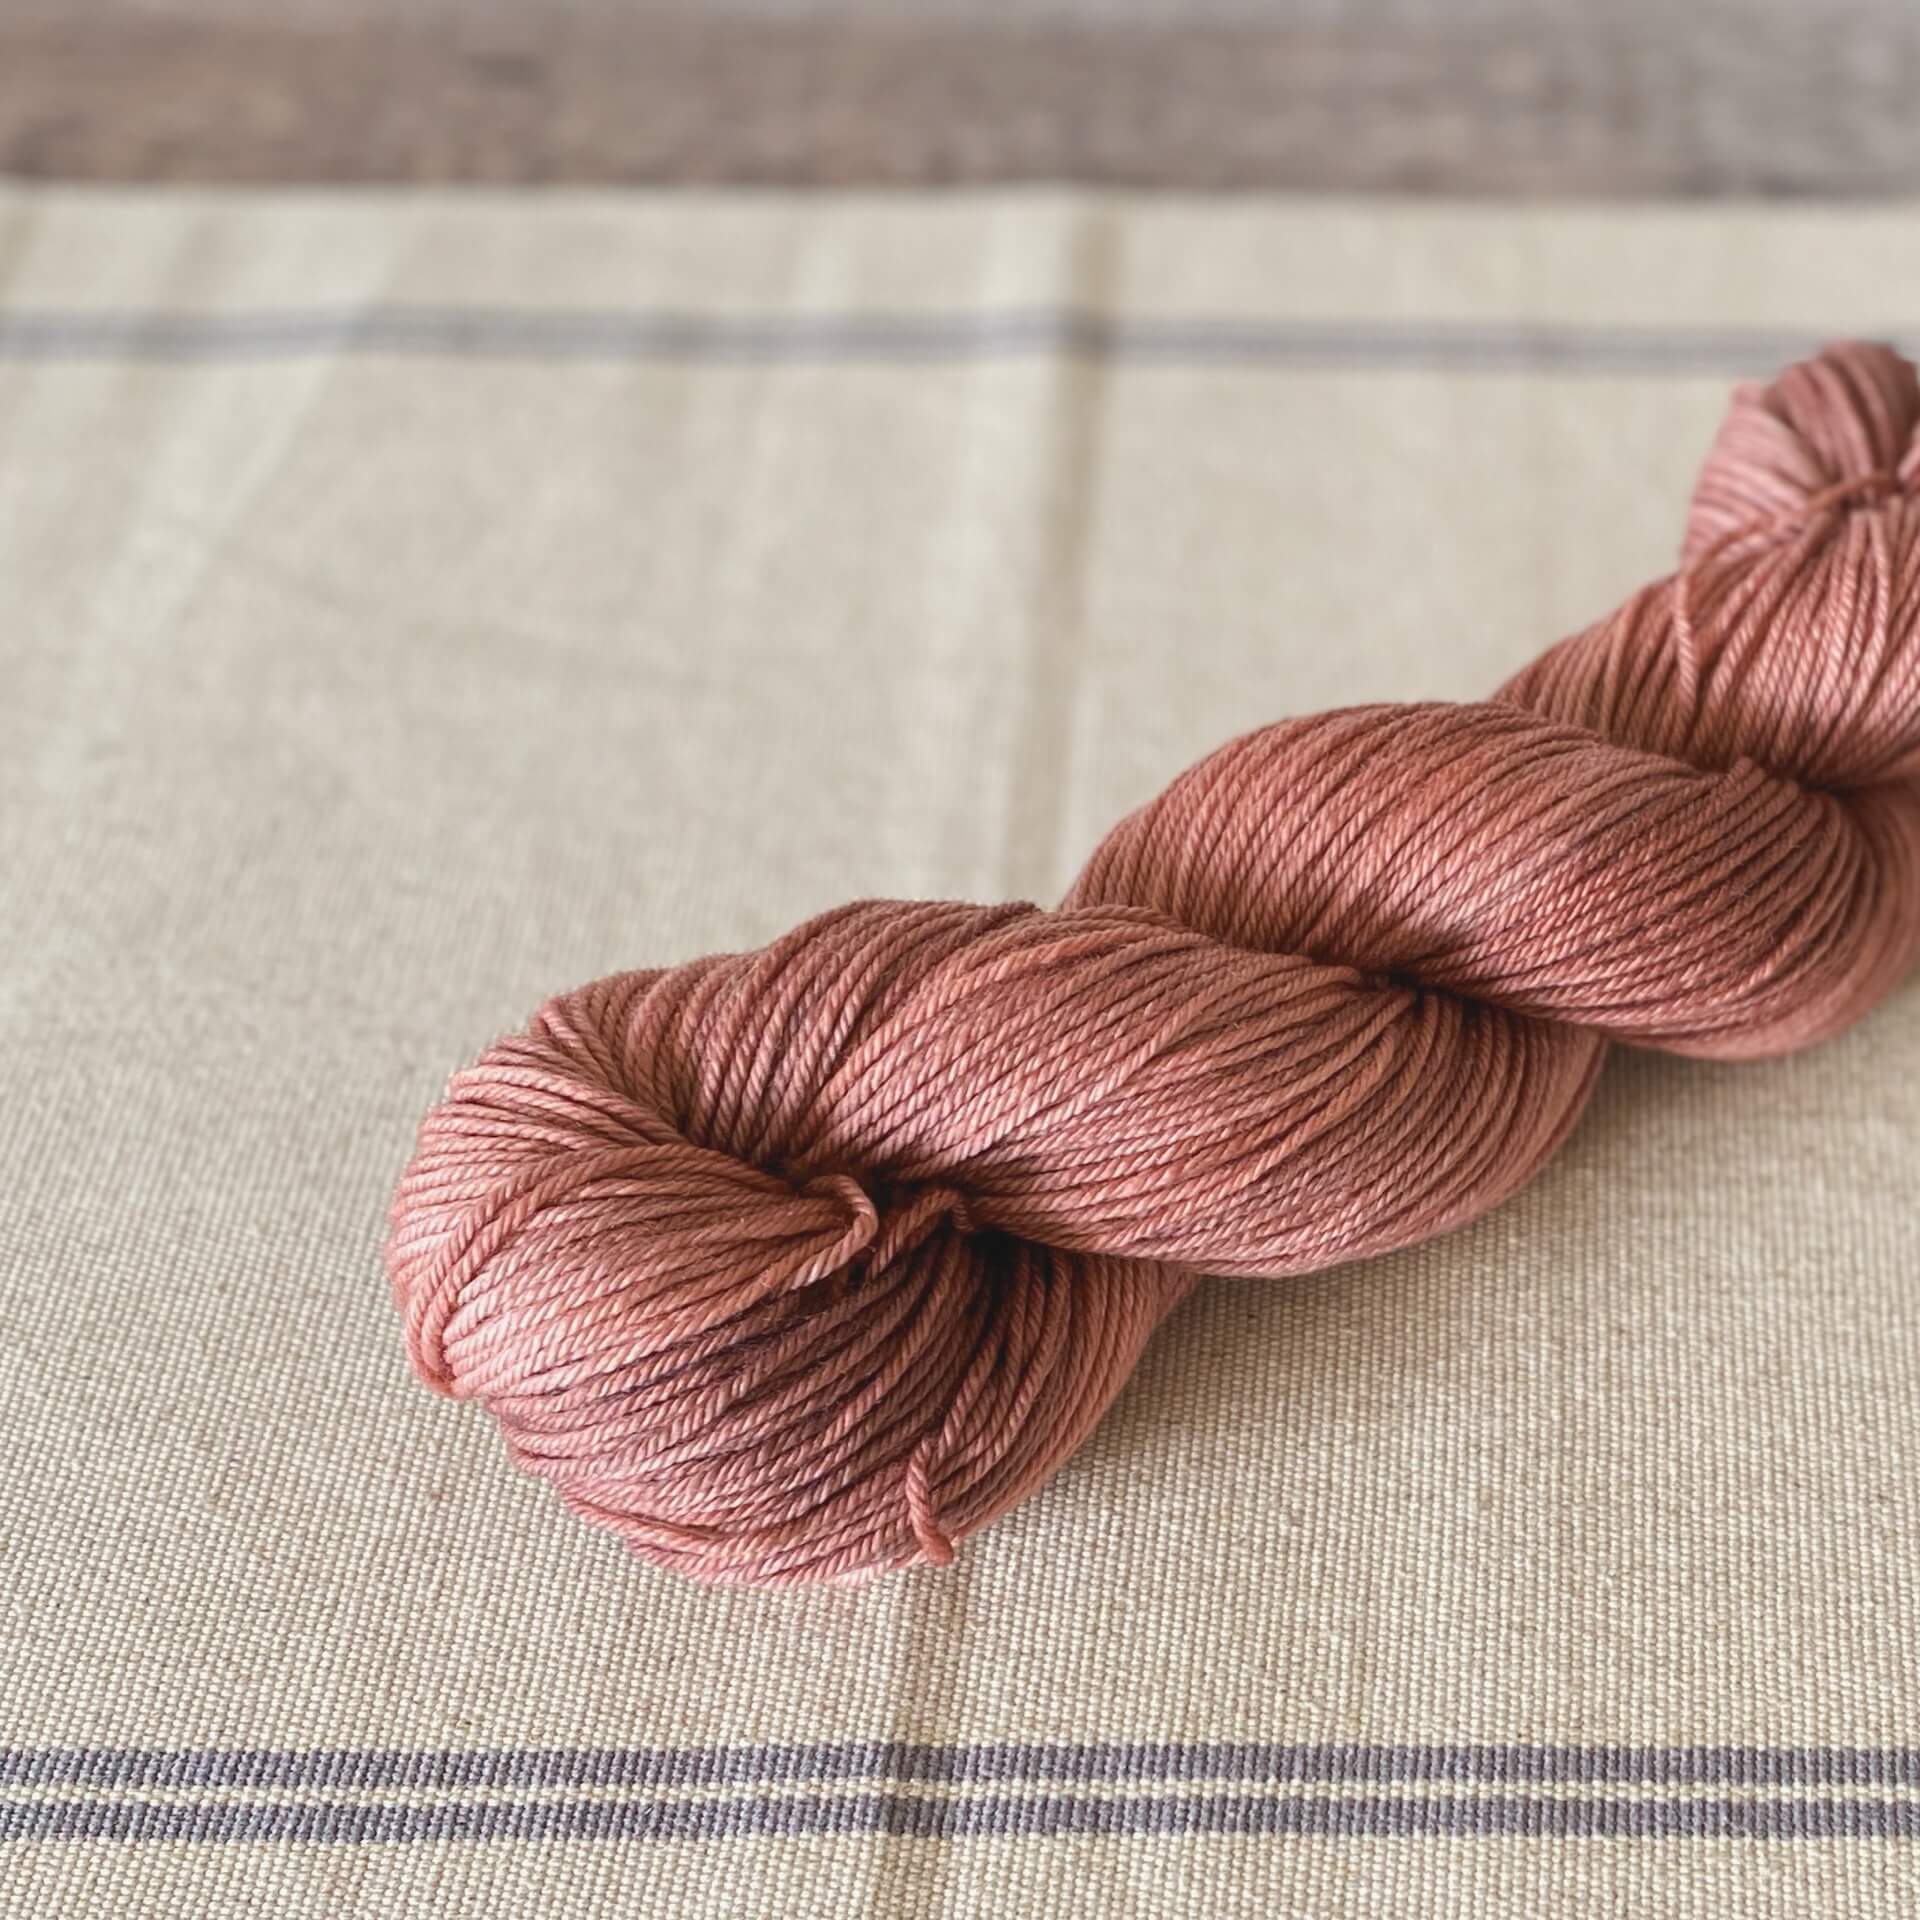 A wound up skein of yarn sits on a linen table runner. The yarn is coloured a deep pink. 